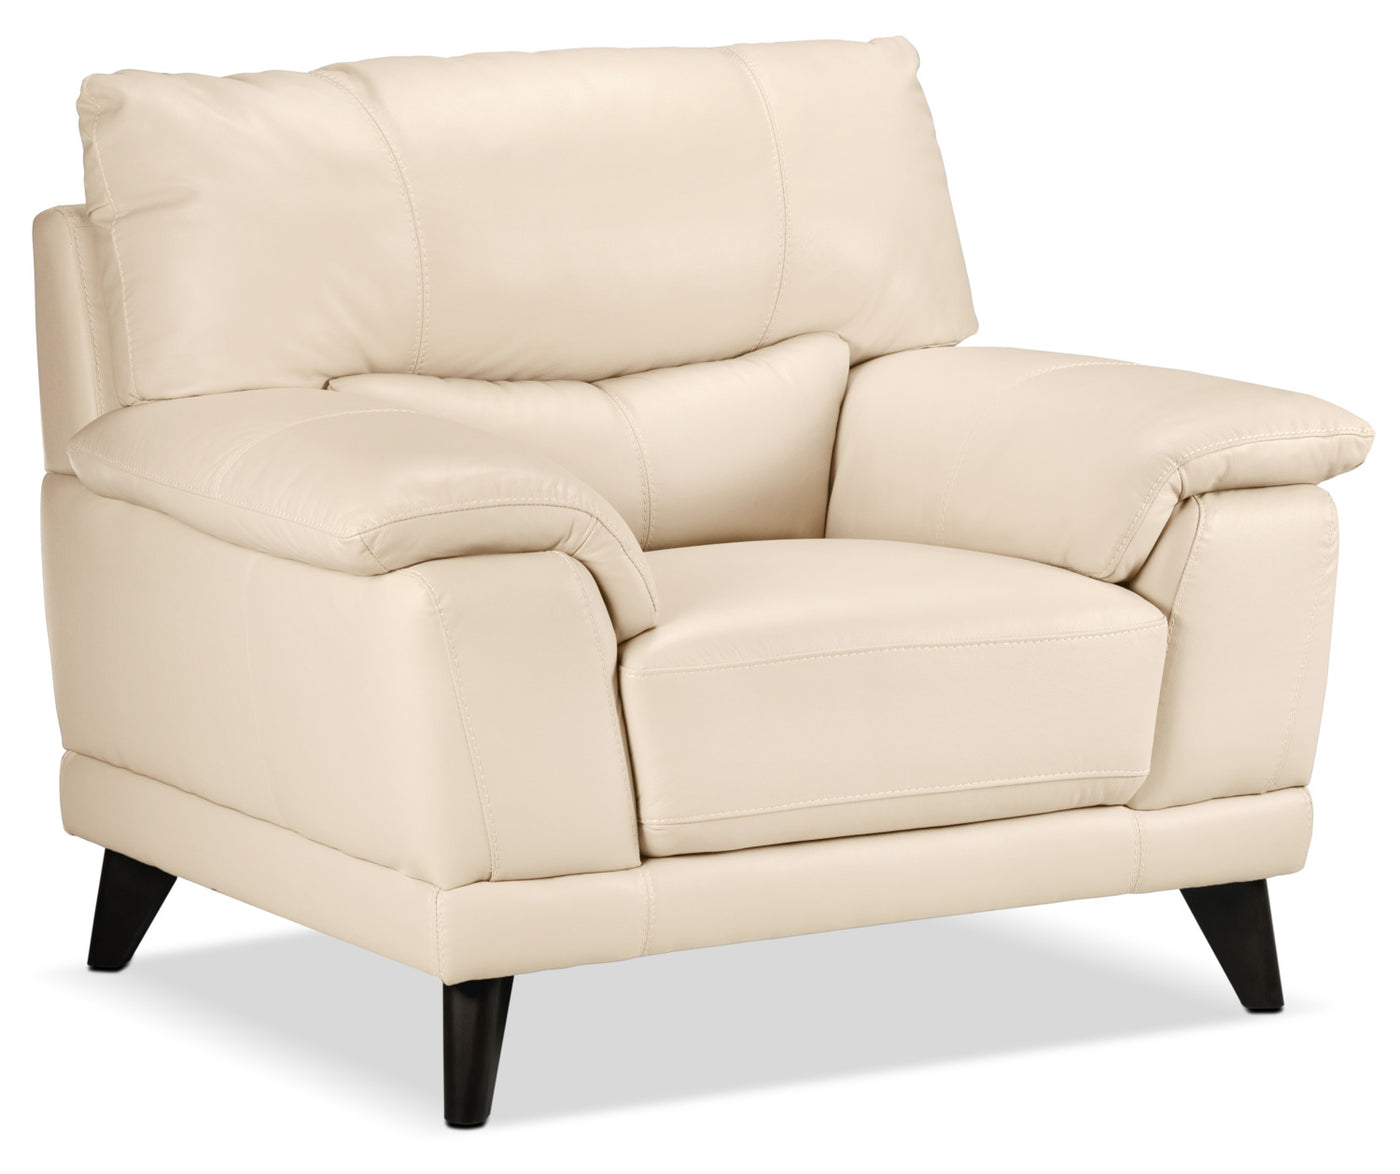 Braylon Leather Sofa and Chair Set - Bisque